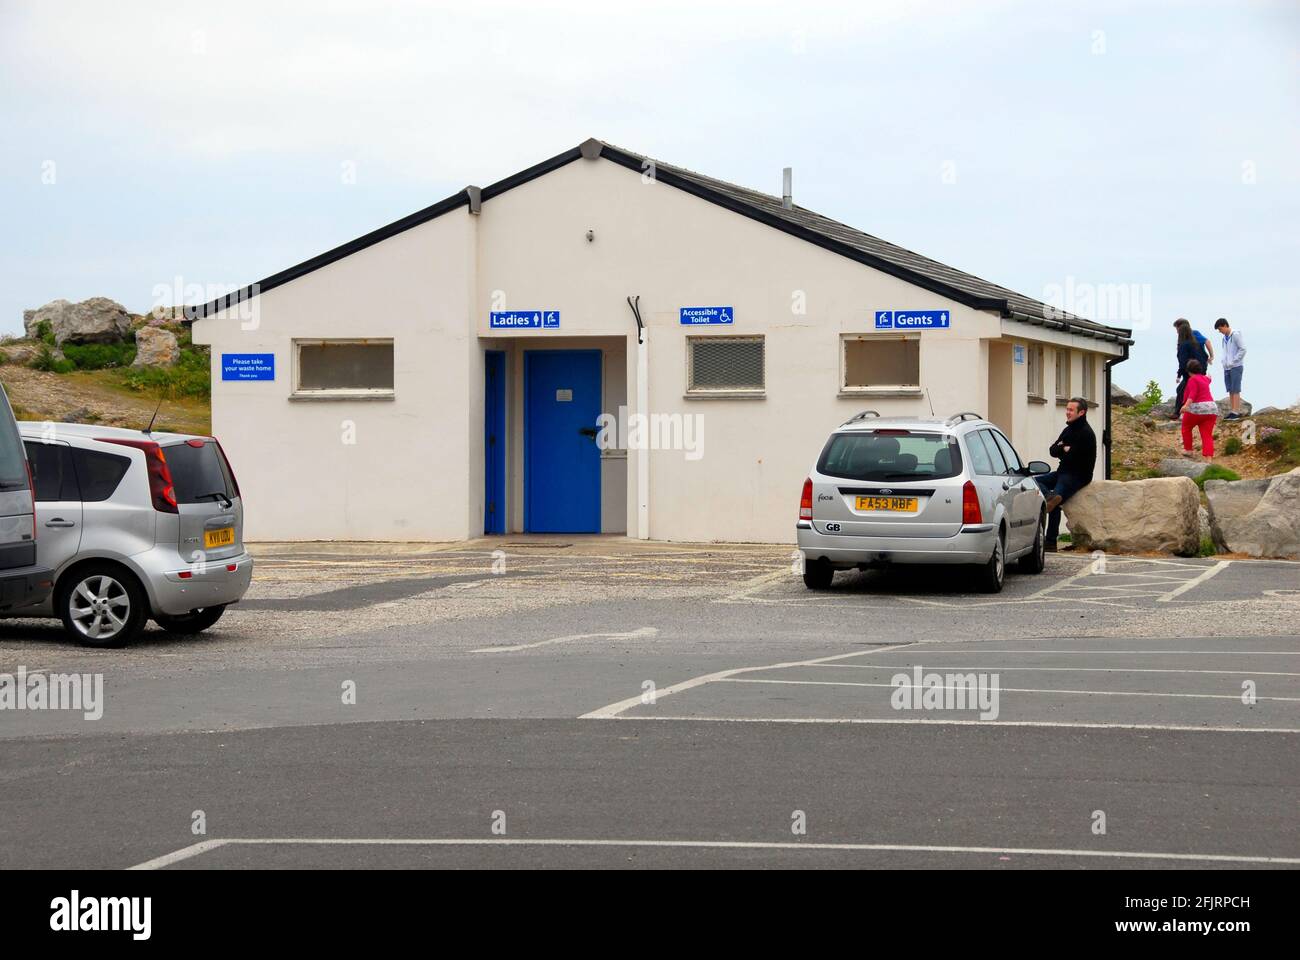 Modern public toilet in car park at holiday location Stock Photo